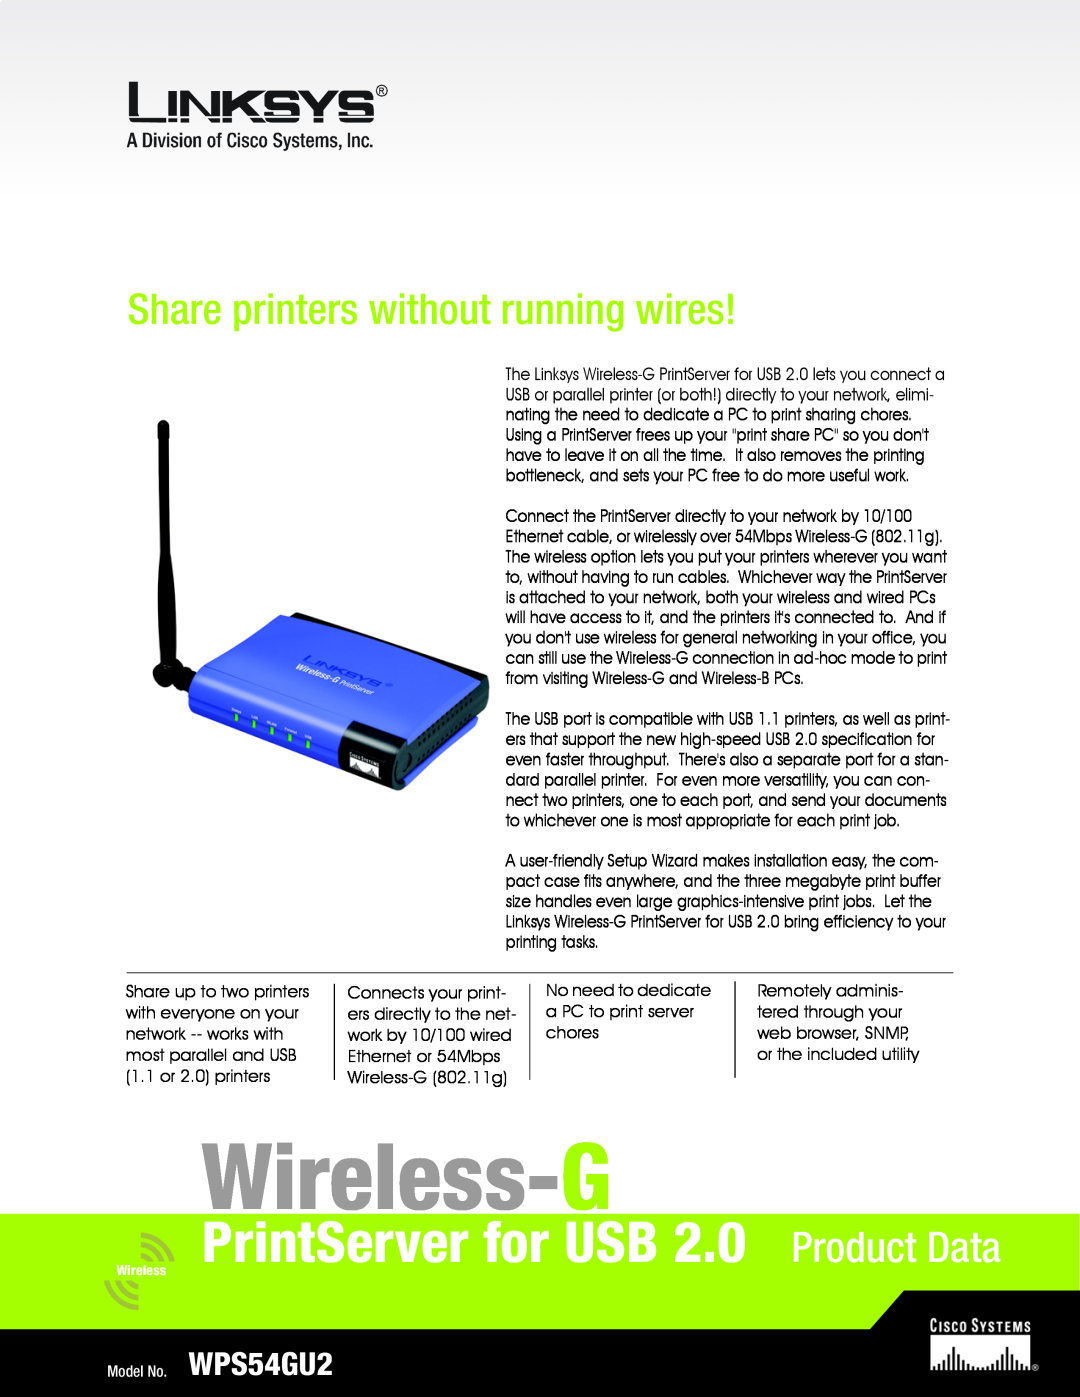 Linksys WPS54GU2 manual 2.4 802 GHz .11g Wireless- G, User Guide, PrintServer for USB, A Division of Cisco Systems, Inc 